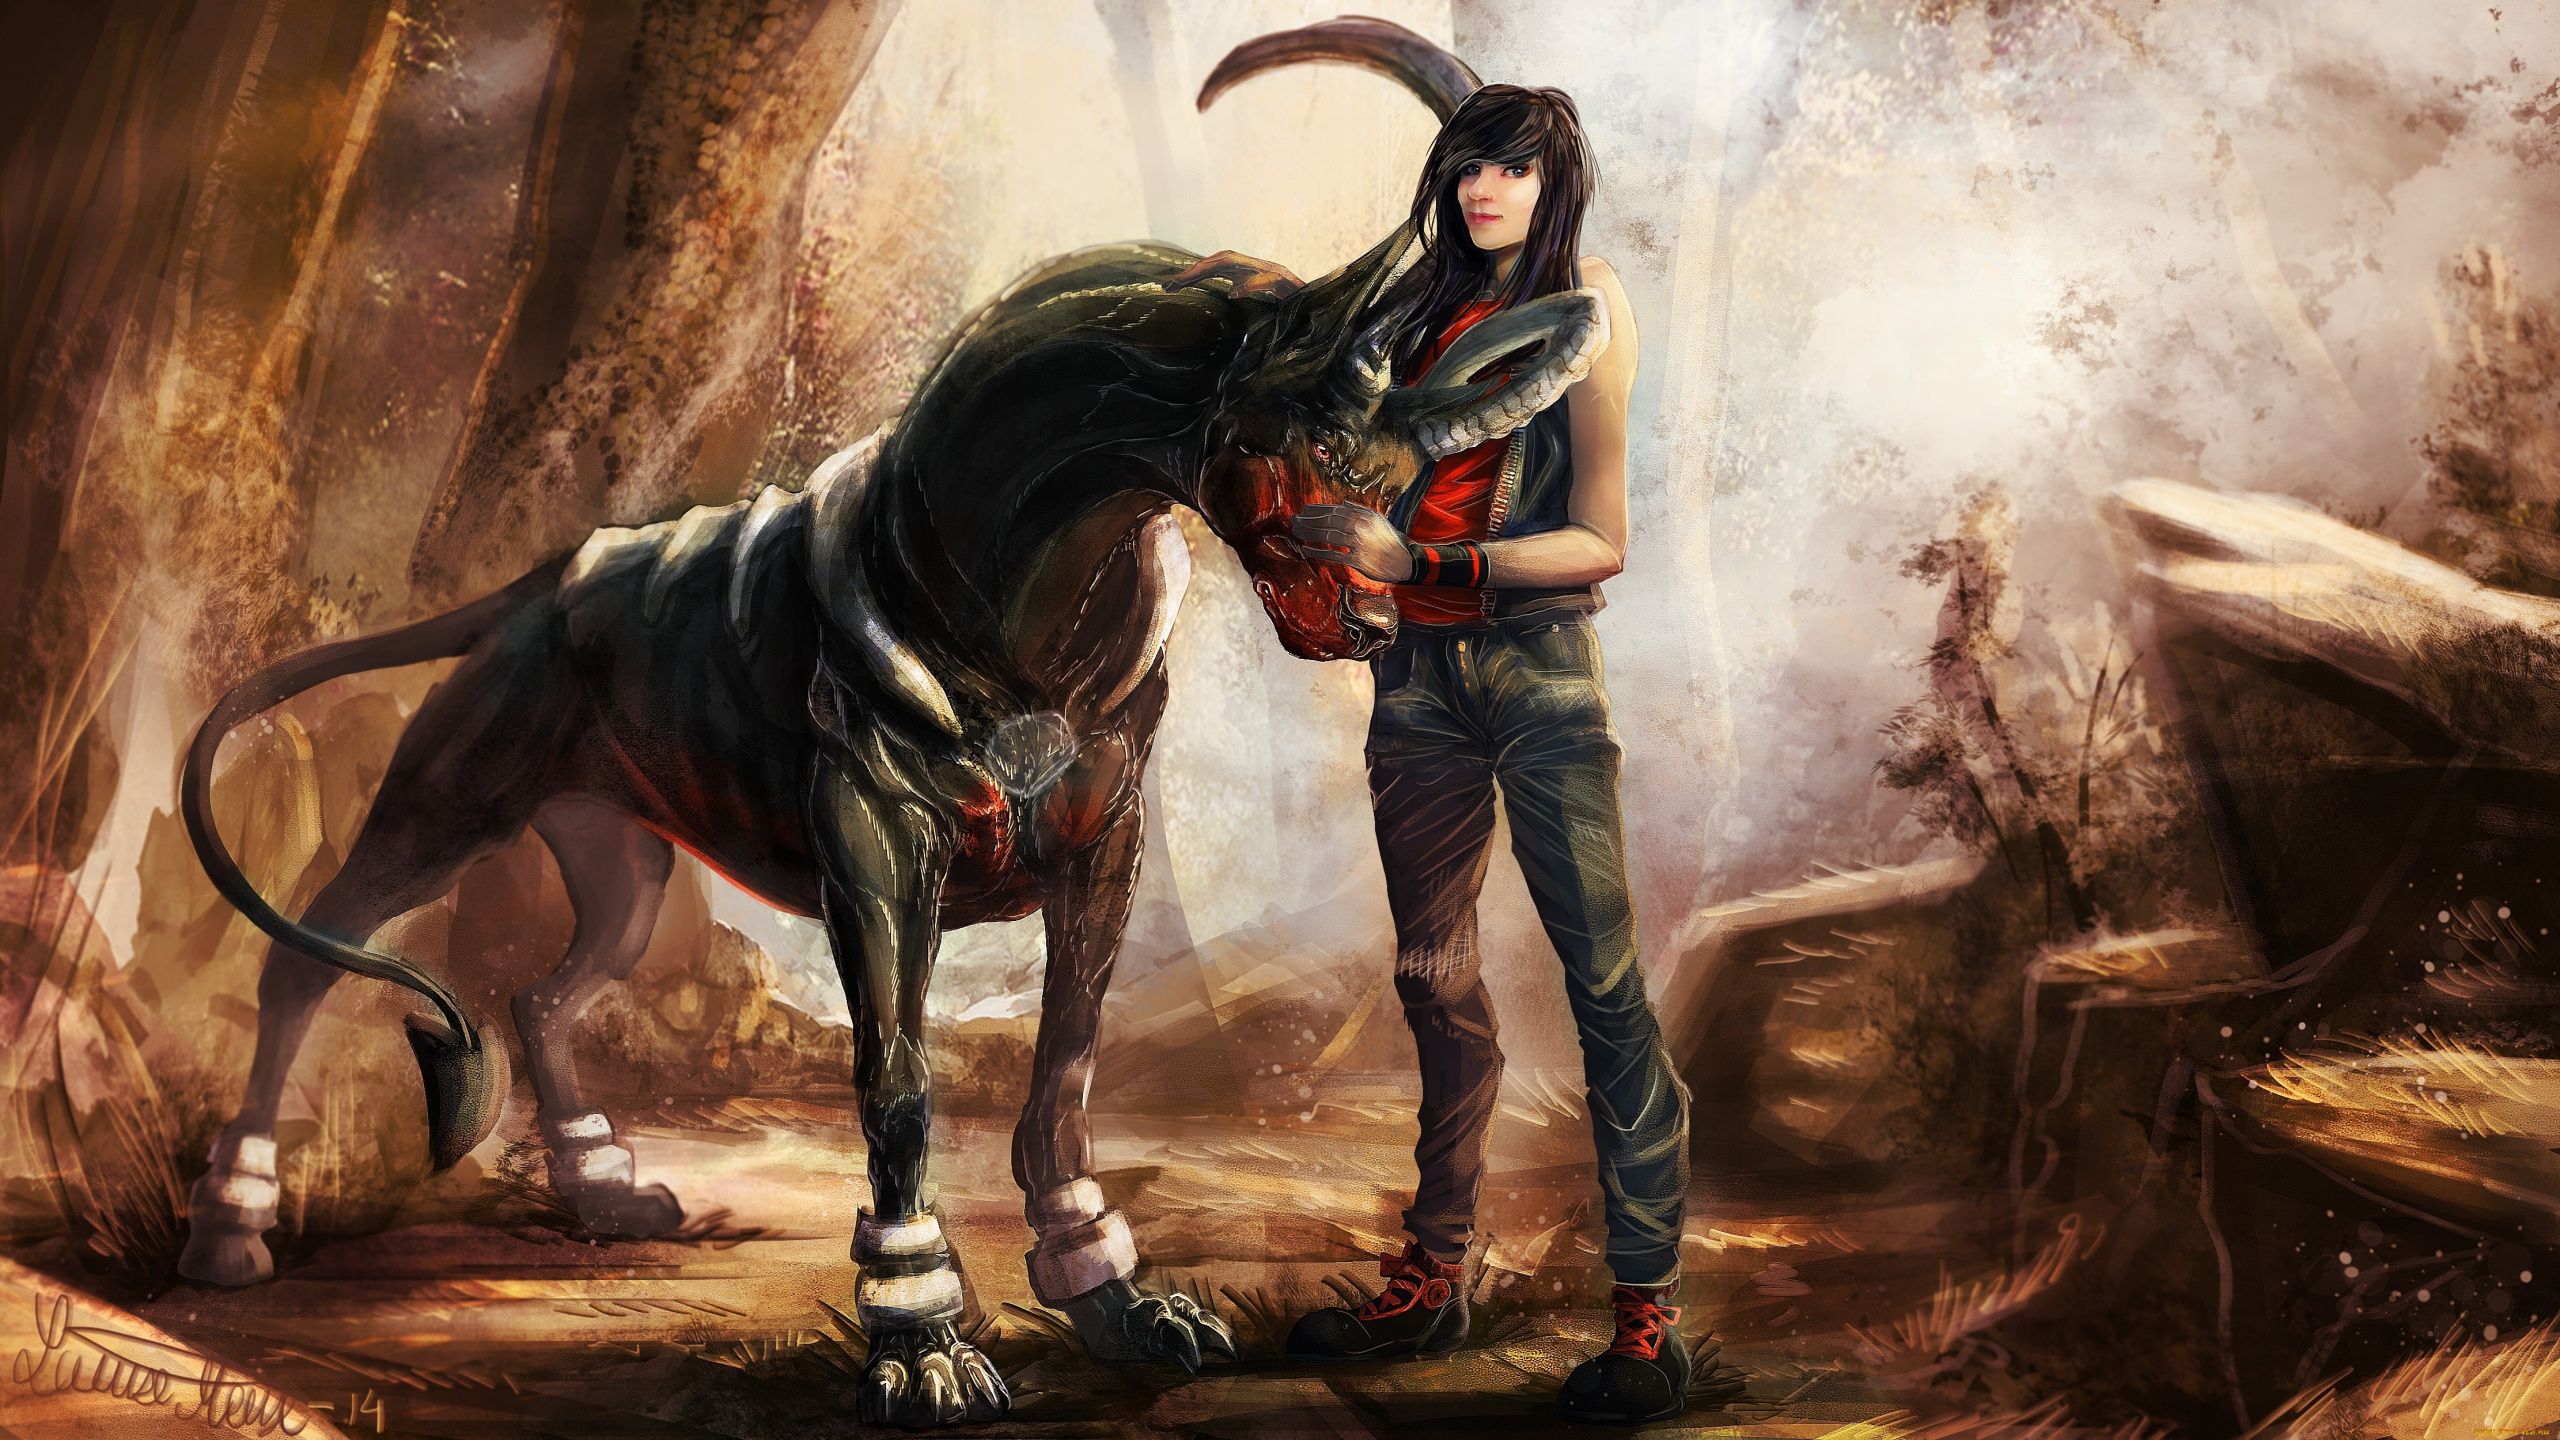 Woman in Black and Red Long Sleeve Shirt and Blue Denim Jeans Standing Beside Black Horse. Wallpaper in 2560x1440 Resolution